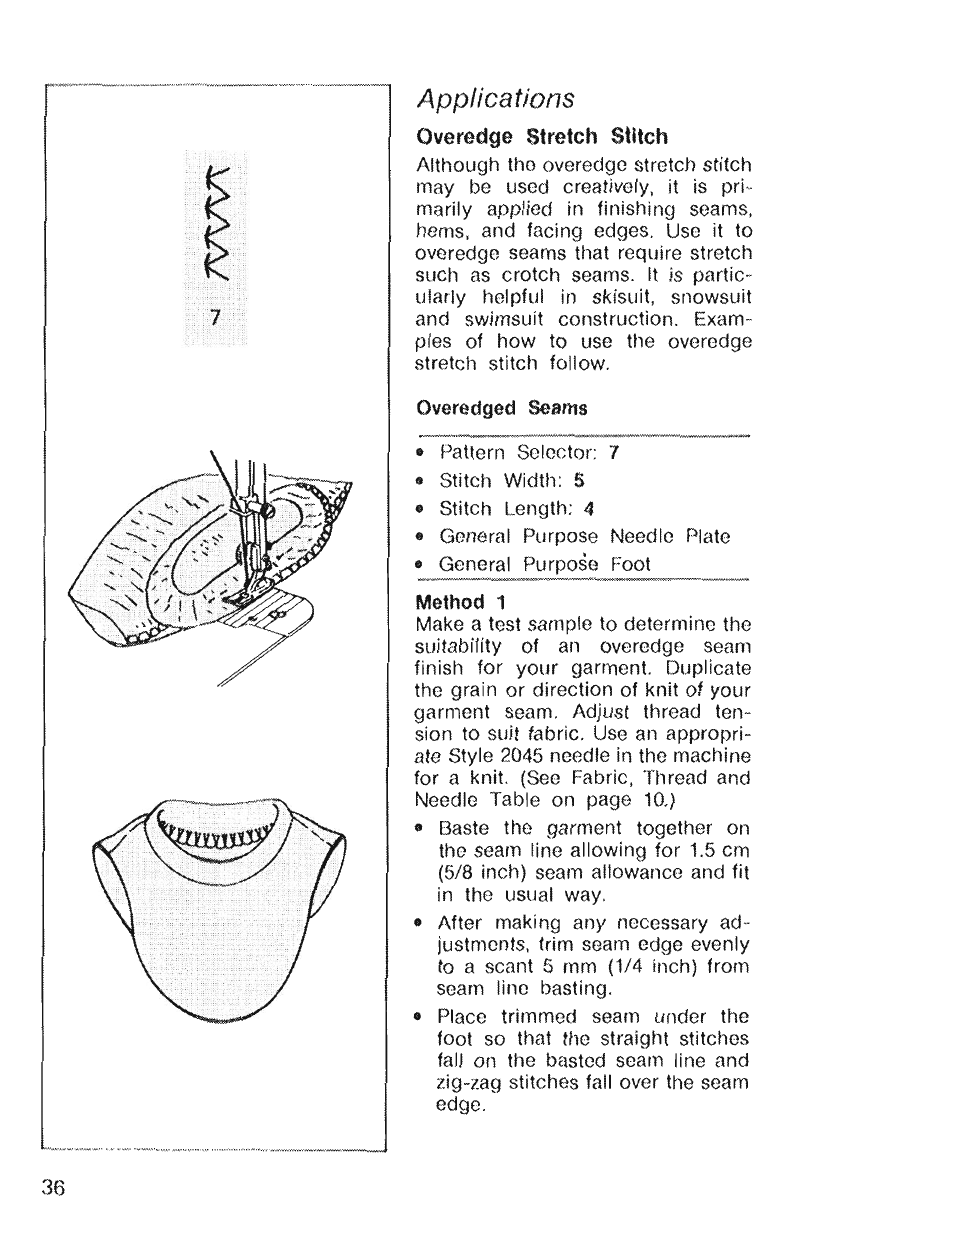 Applications, Overedge stretch stitch | SINGER 4022 User Manual | Page 38 / 56